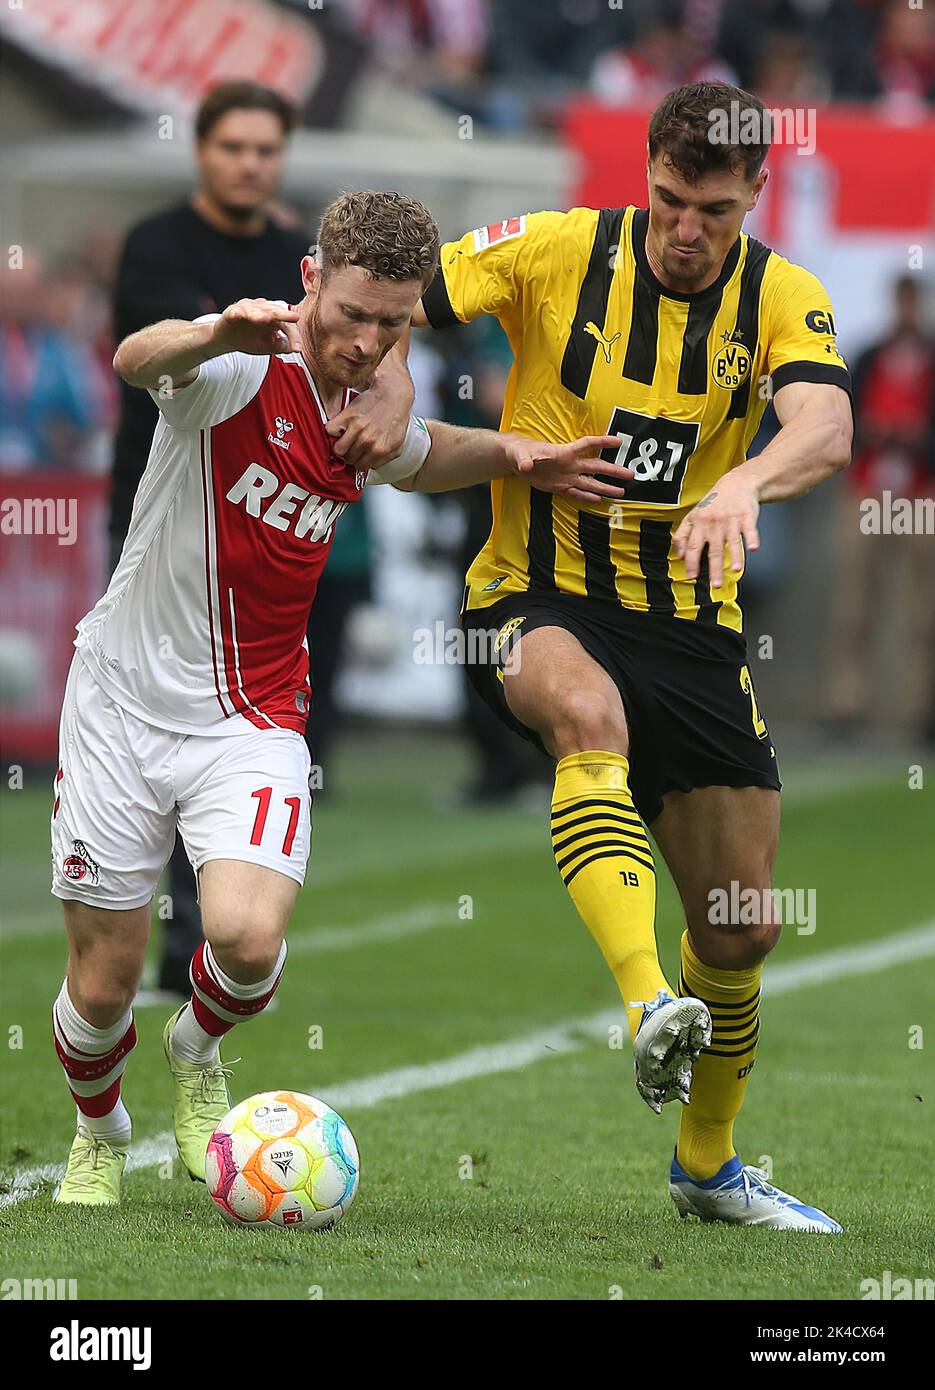 Koeln, Germany. 01st Oct, 2022. Cologne's Florian Kainz, (L), and Dortmund's Thomas Meunier, (R), in action during the German Bundesliga soccer match between FC Cologne and Borussia Dortmund in Cologne. (Final score: Köln 3:2 Borussia Dortmund) Credit: SOPA Images Limited/Alamy Live News Stock Photo